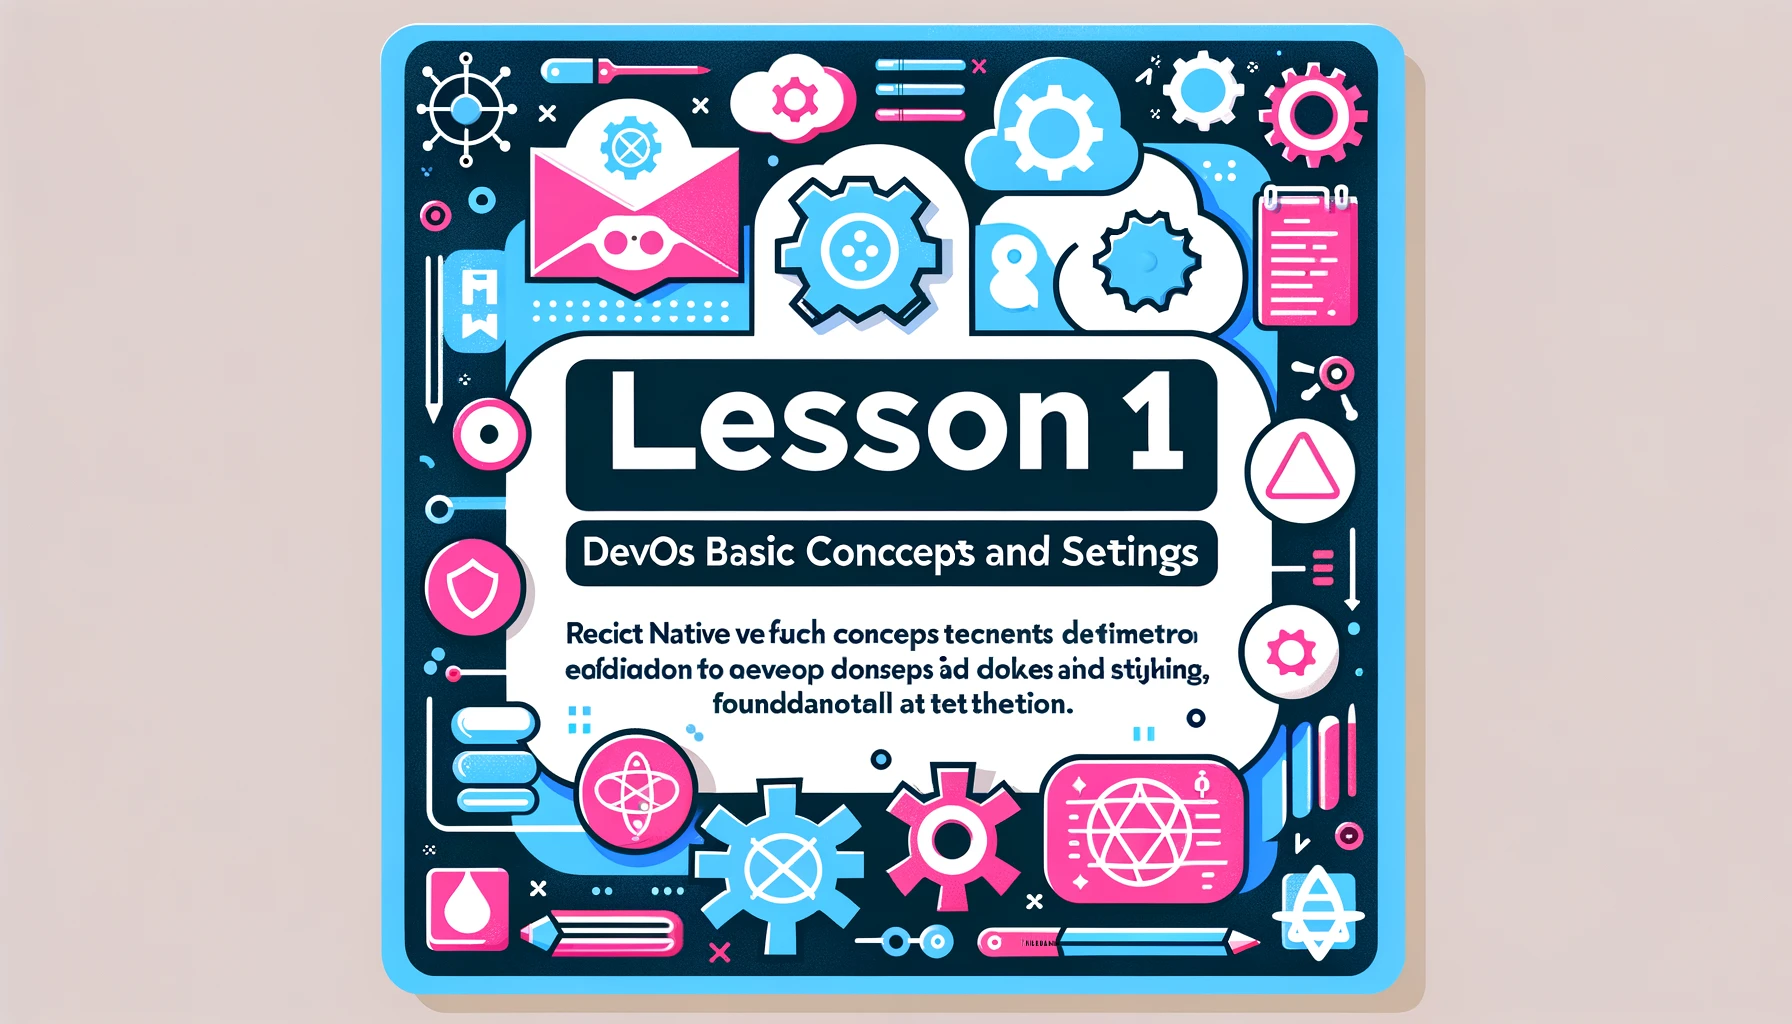 Lesson 1 - React Native DevOps basic concepts and settings